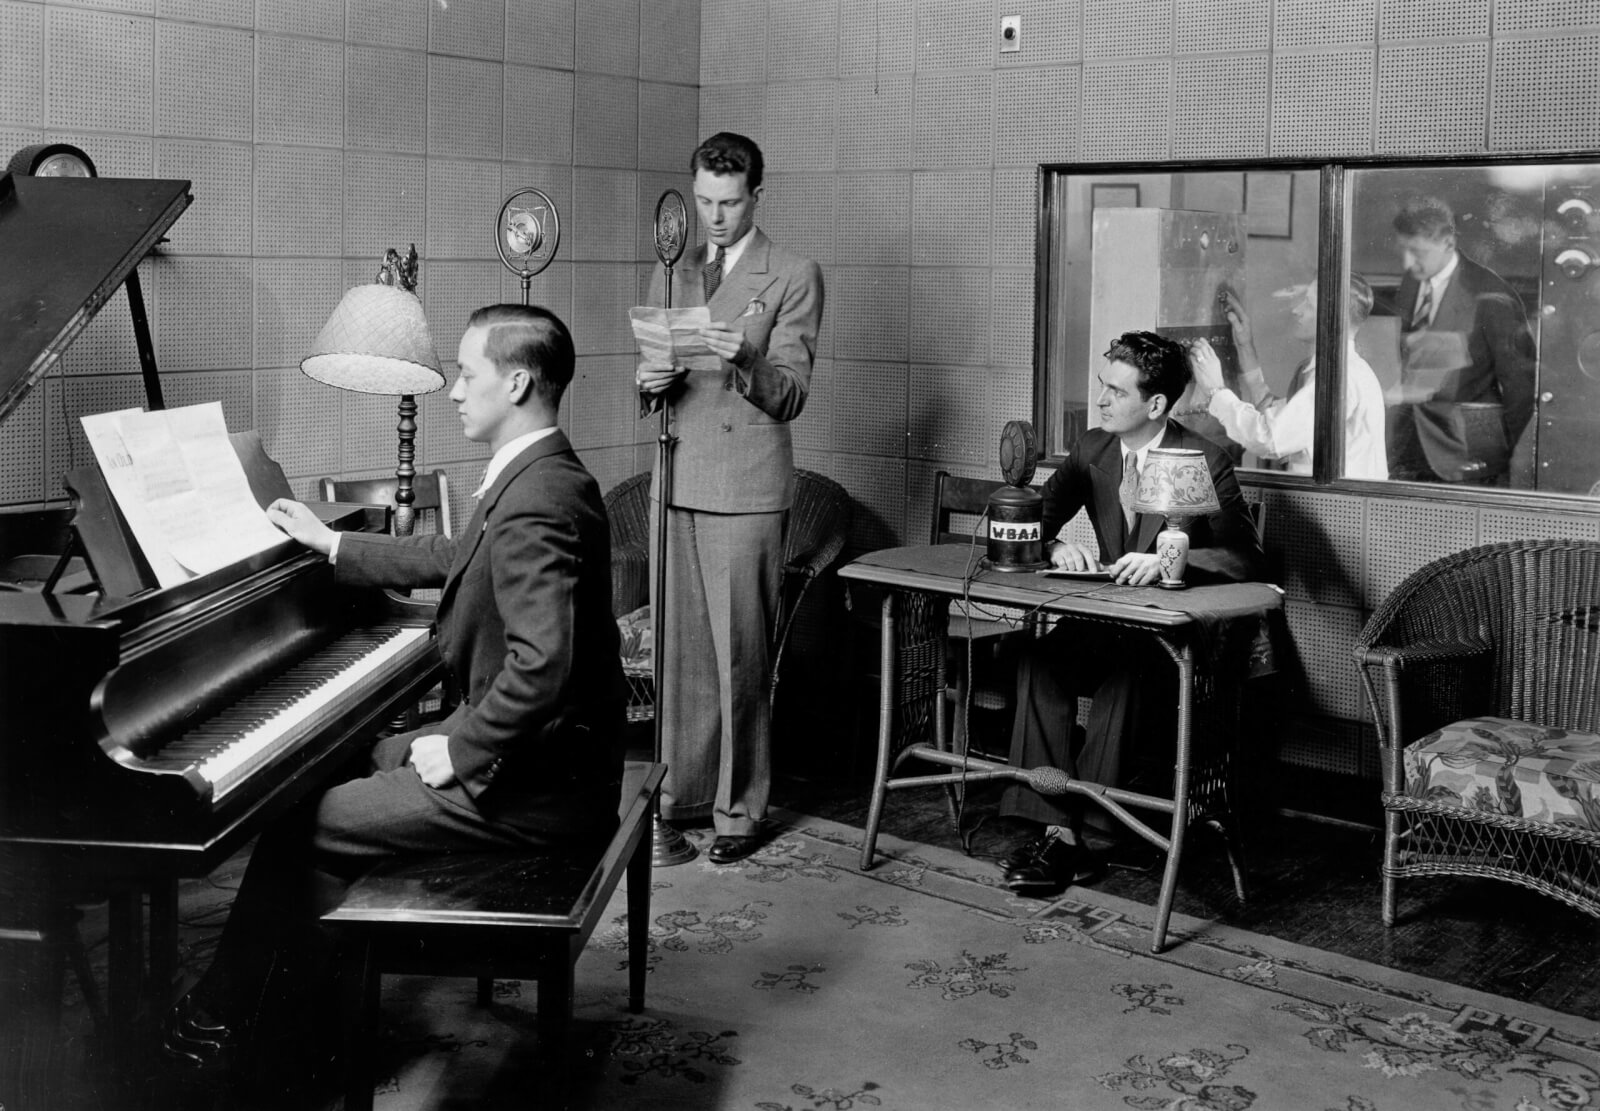 Wicker furniture, a tapestry rug and grand piano gave the 1934 studio a homey look.